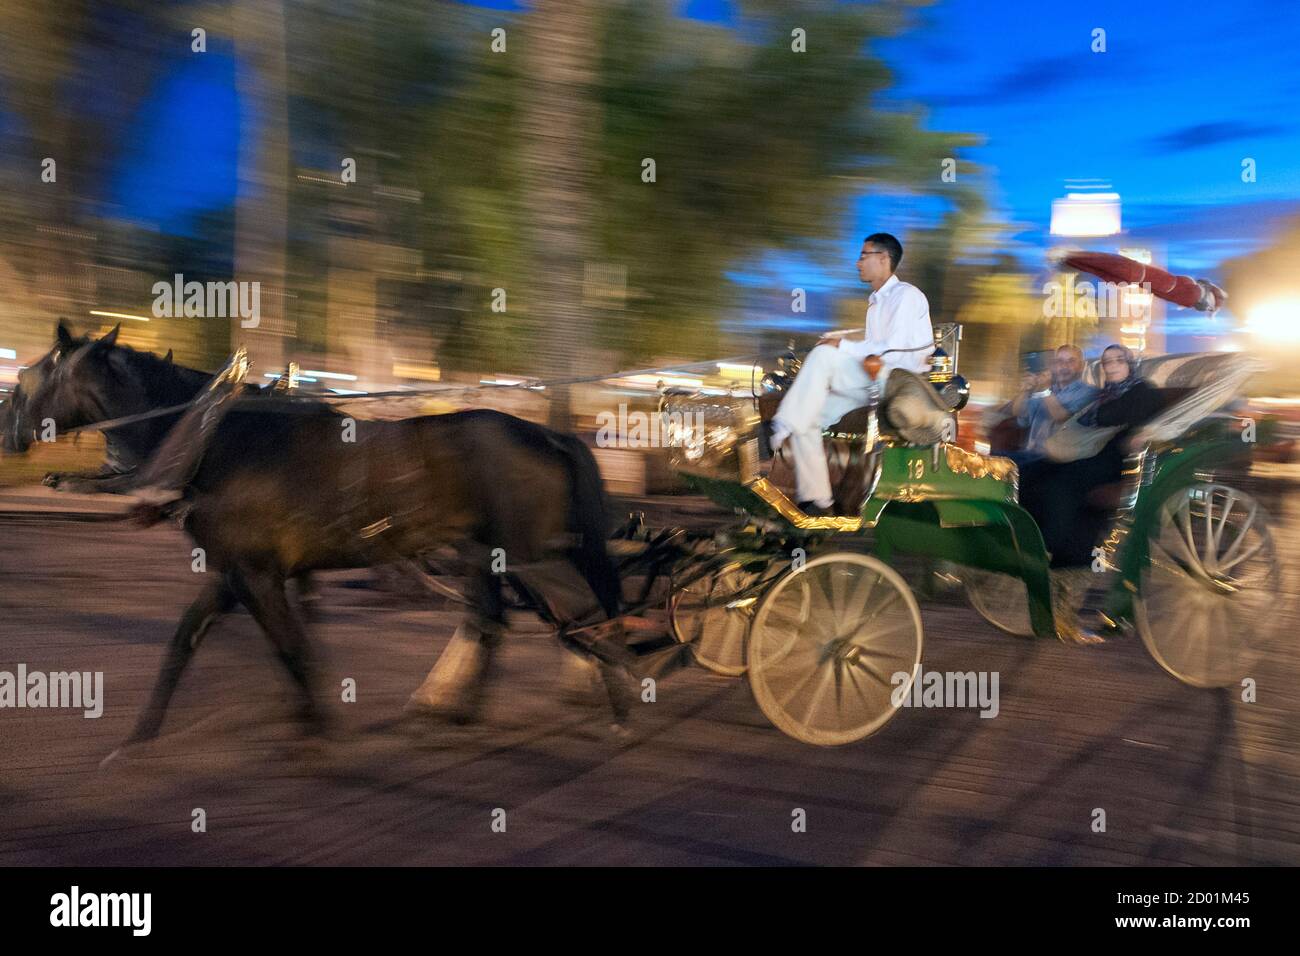 Horse drawn carriage in Jemaa El Fna Square in Marrakech, Morocco. Stock Photo